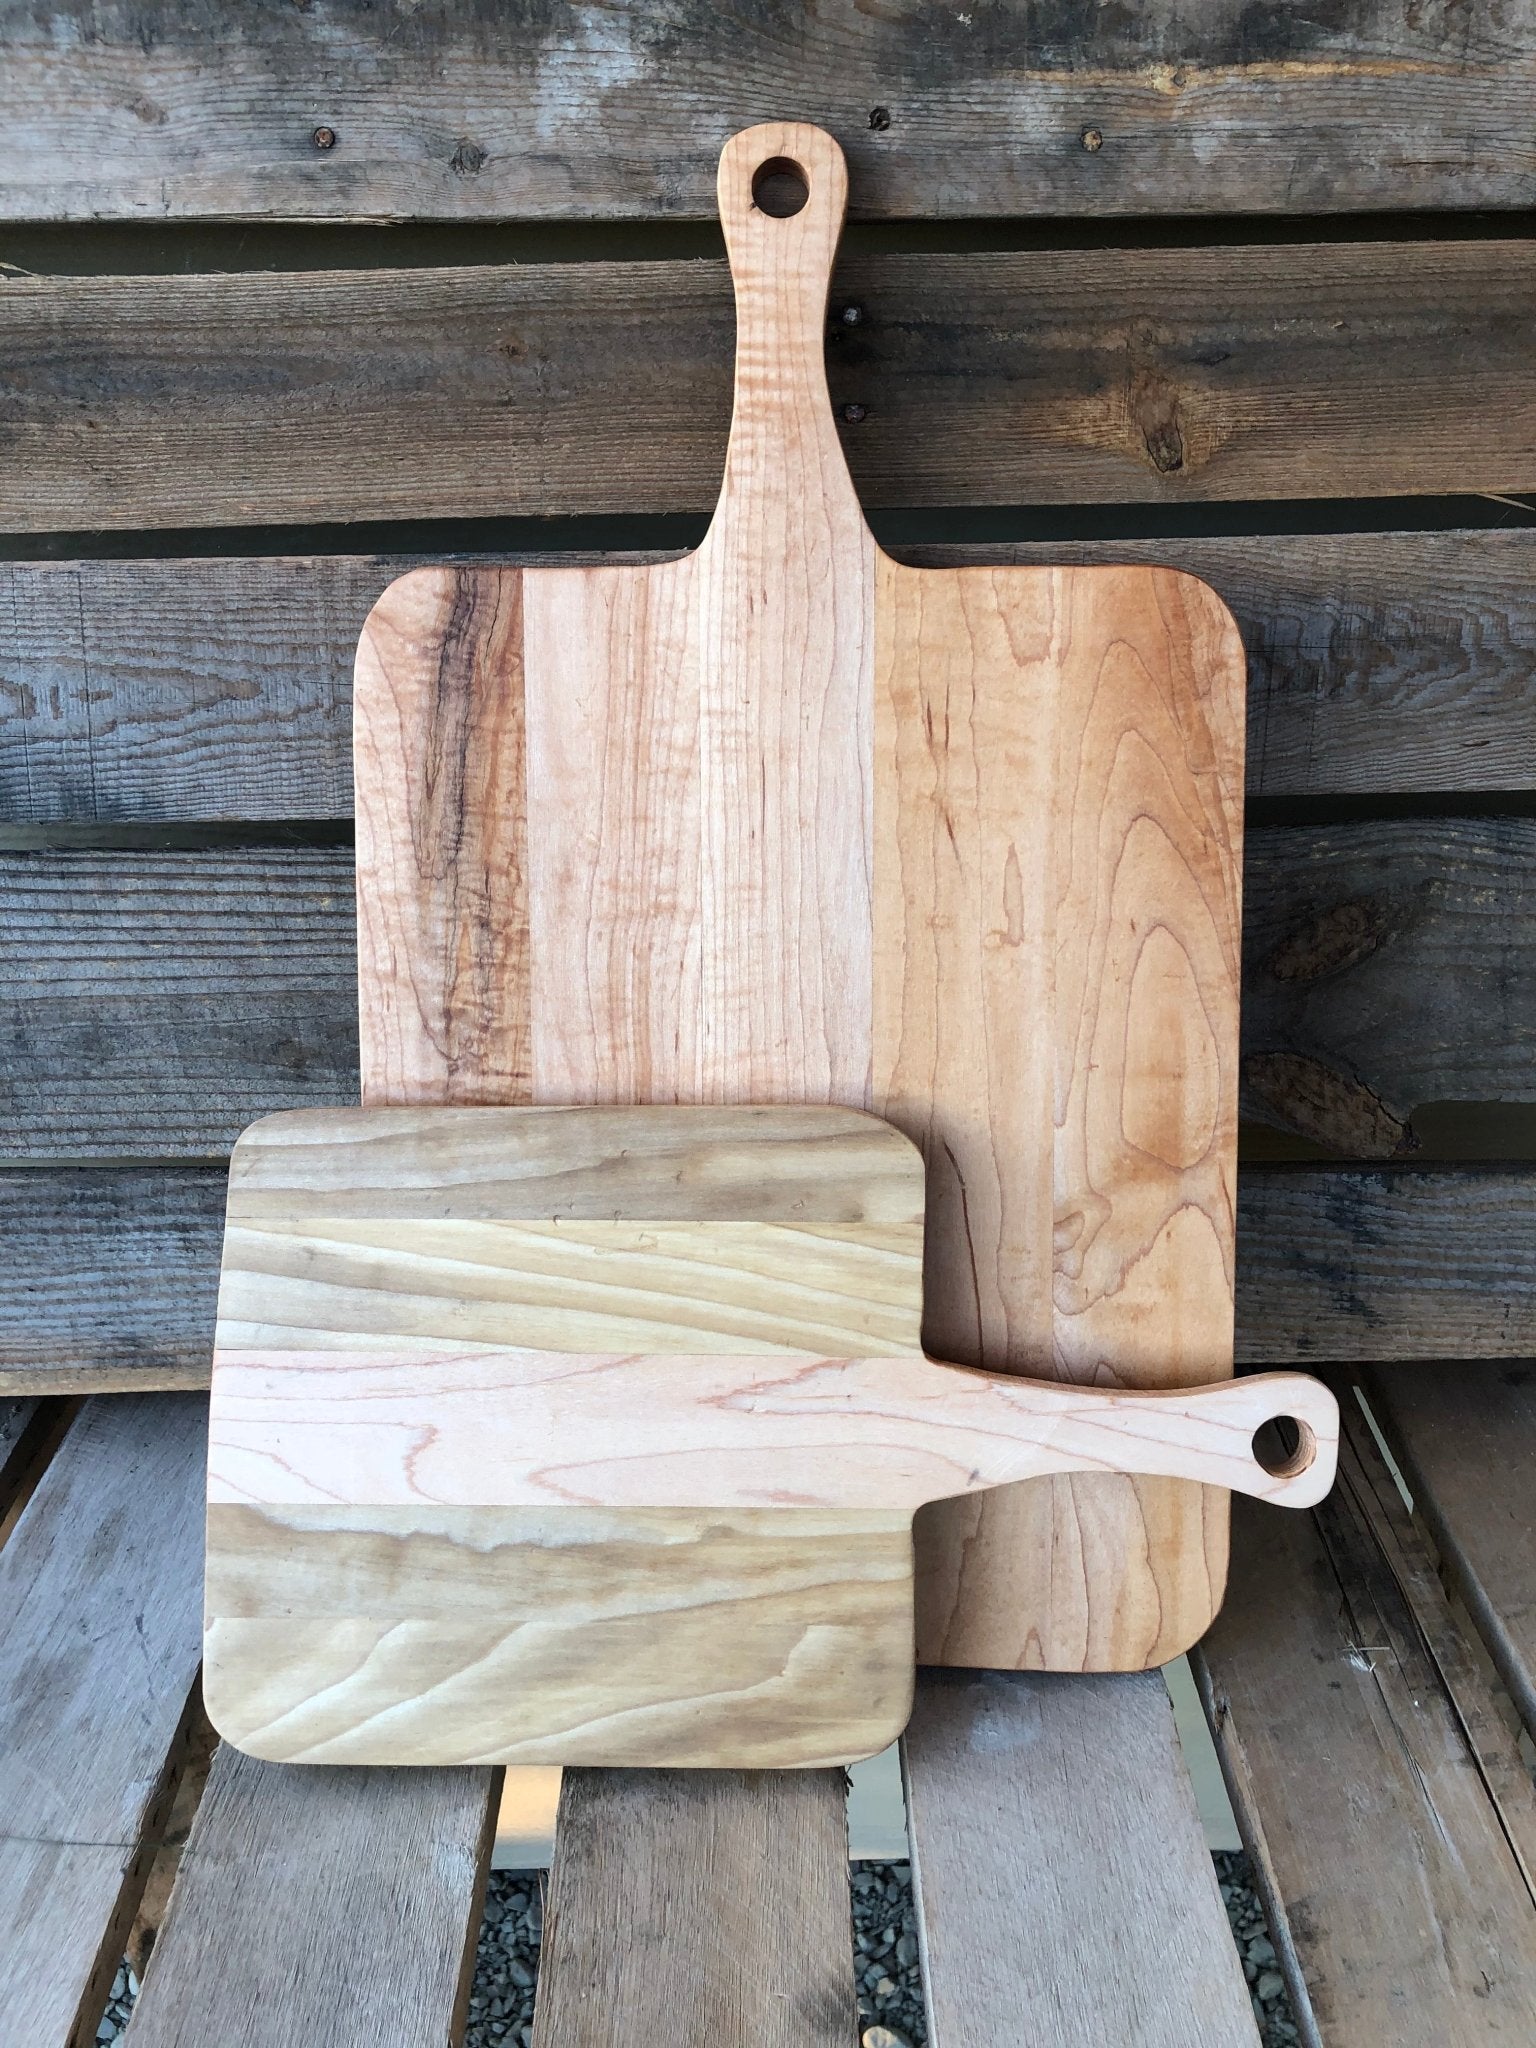 Small Cut Out Handle Board